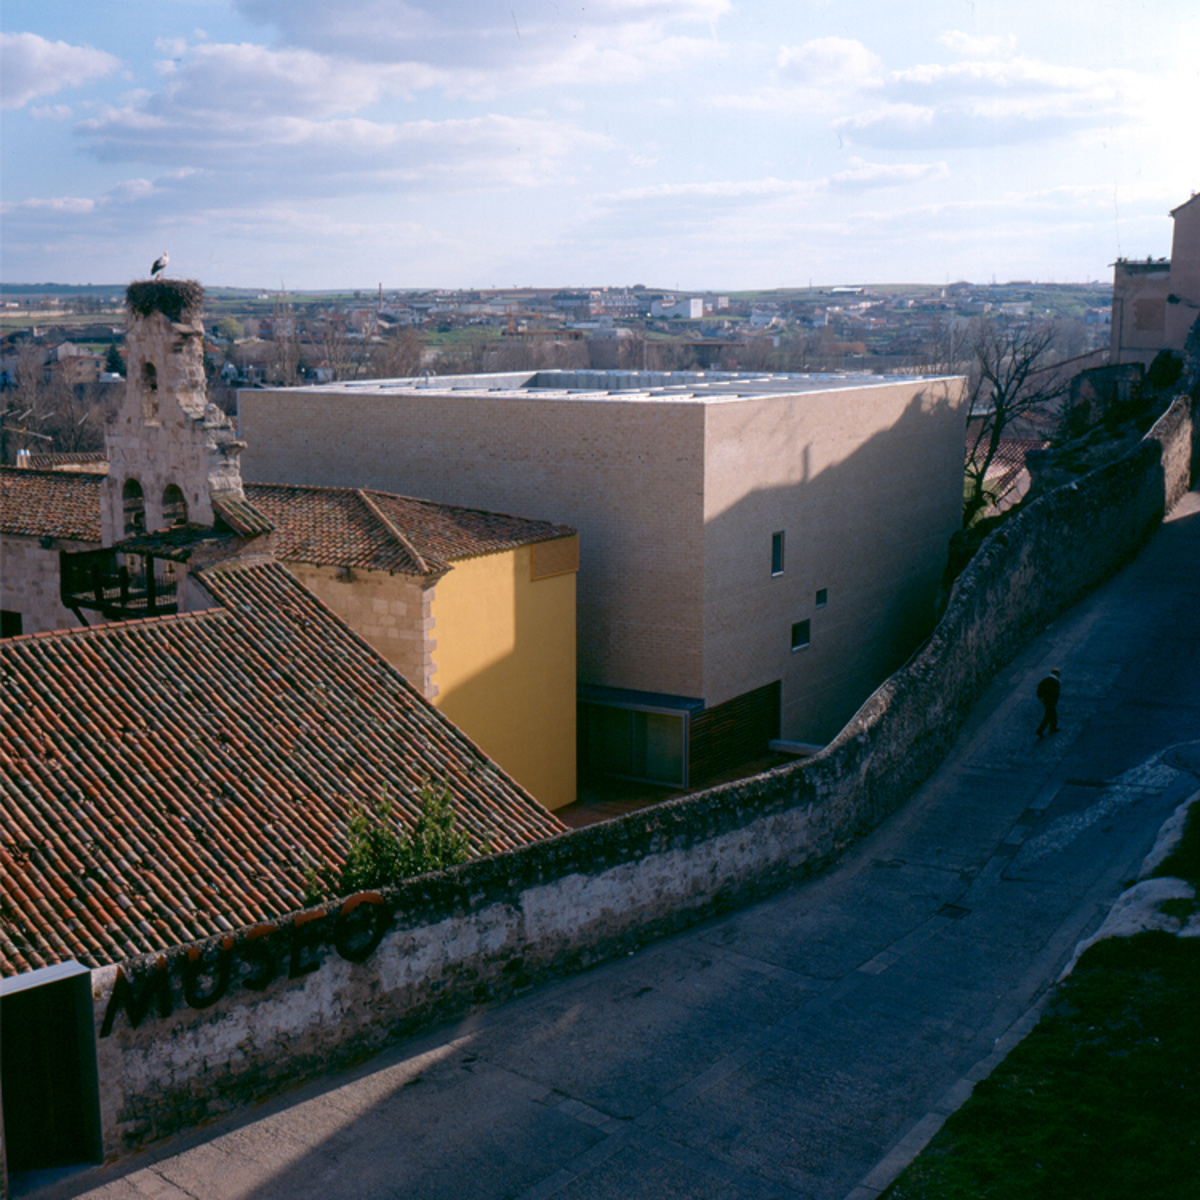  Provincial Museum of Archaeology and Fine Arts of Zamora